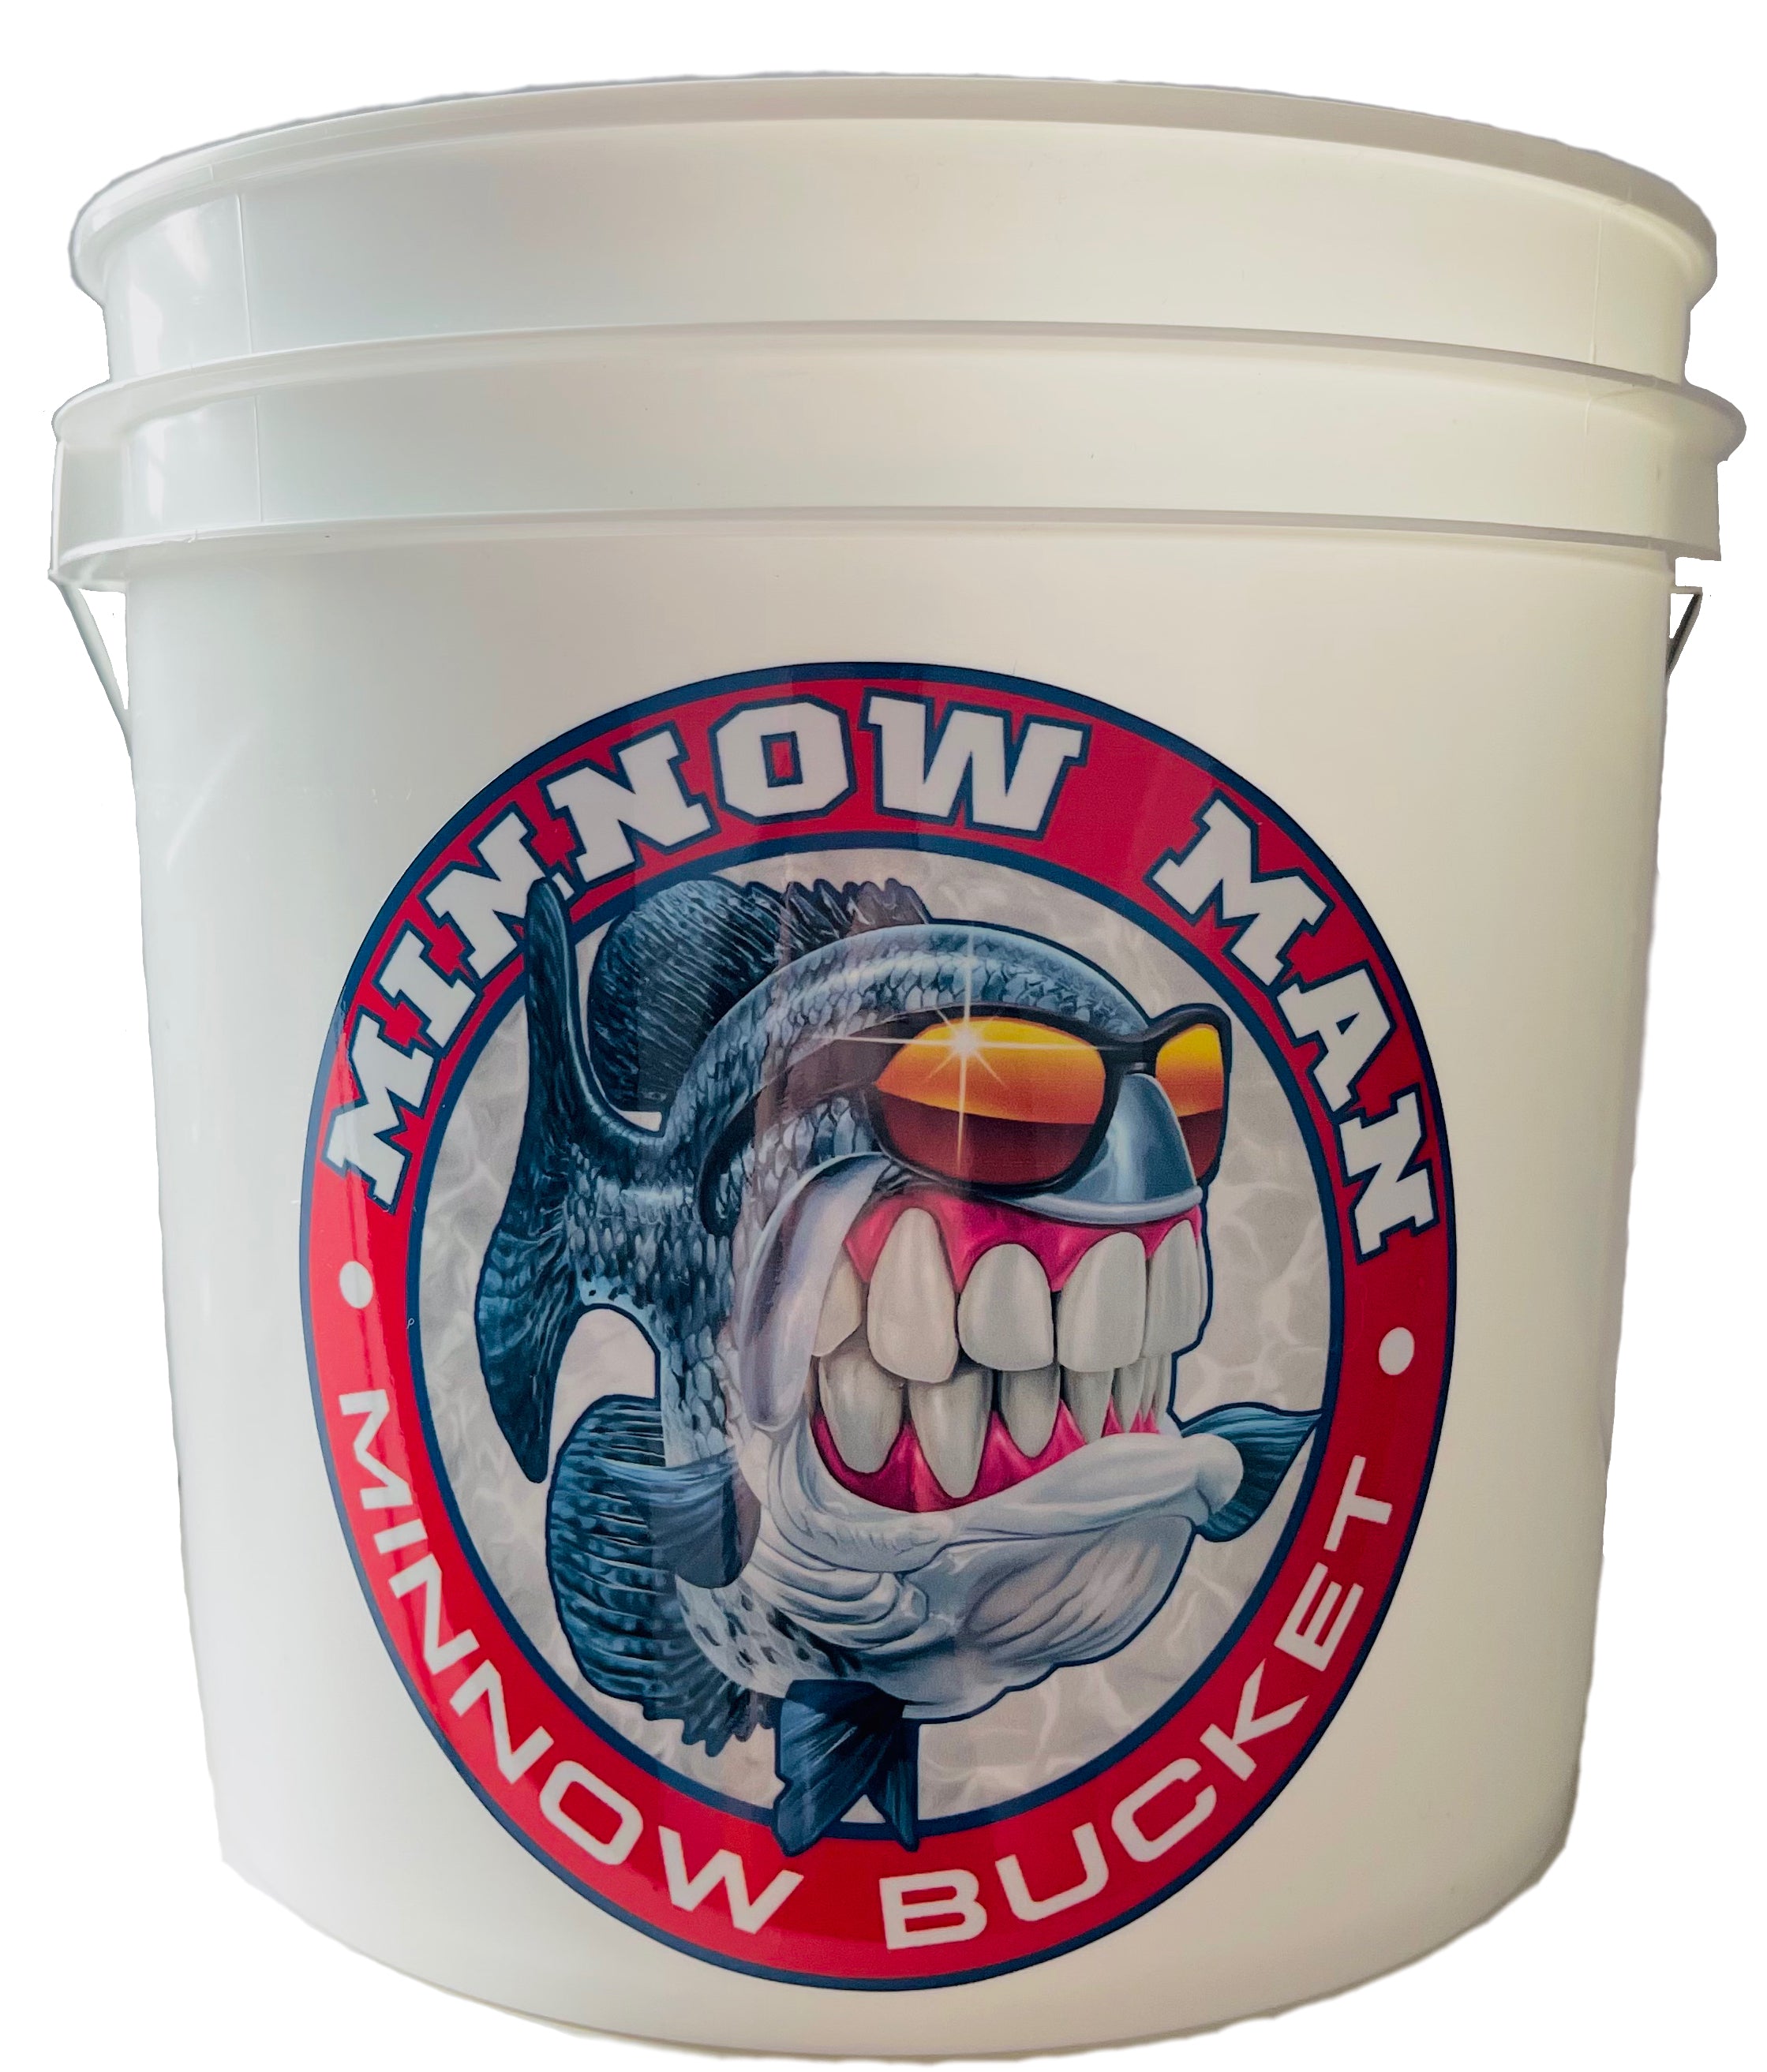 The Mr. Crappie® Minnow Man - Minnow Bucket DOES NOT come with a lid at this time.